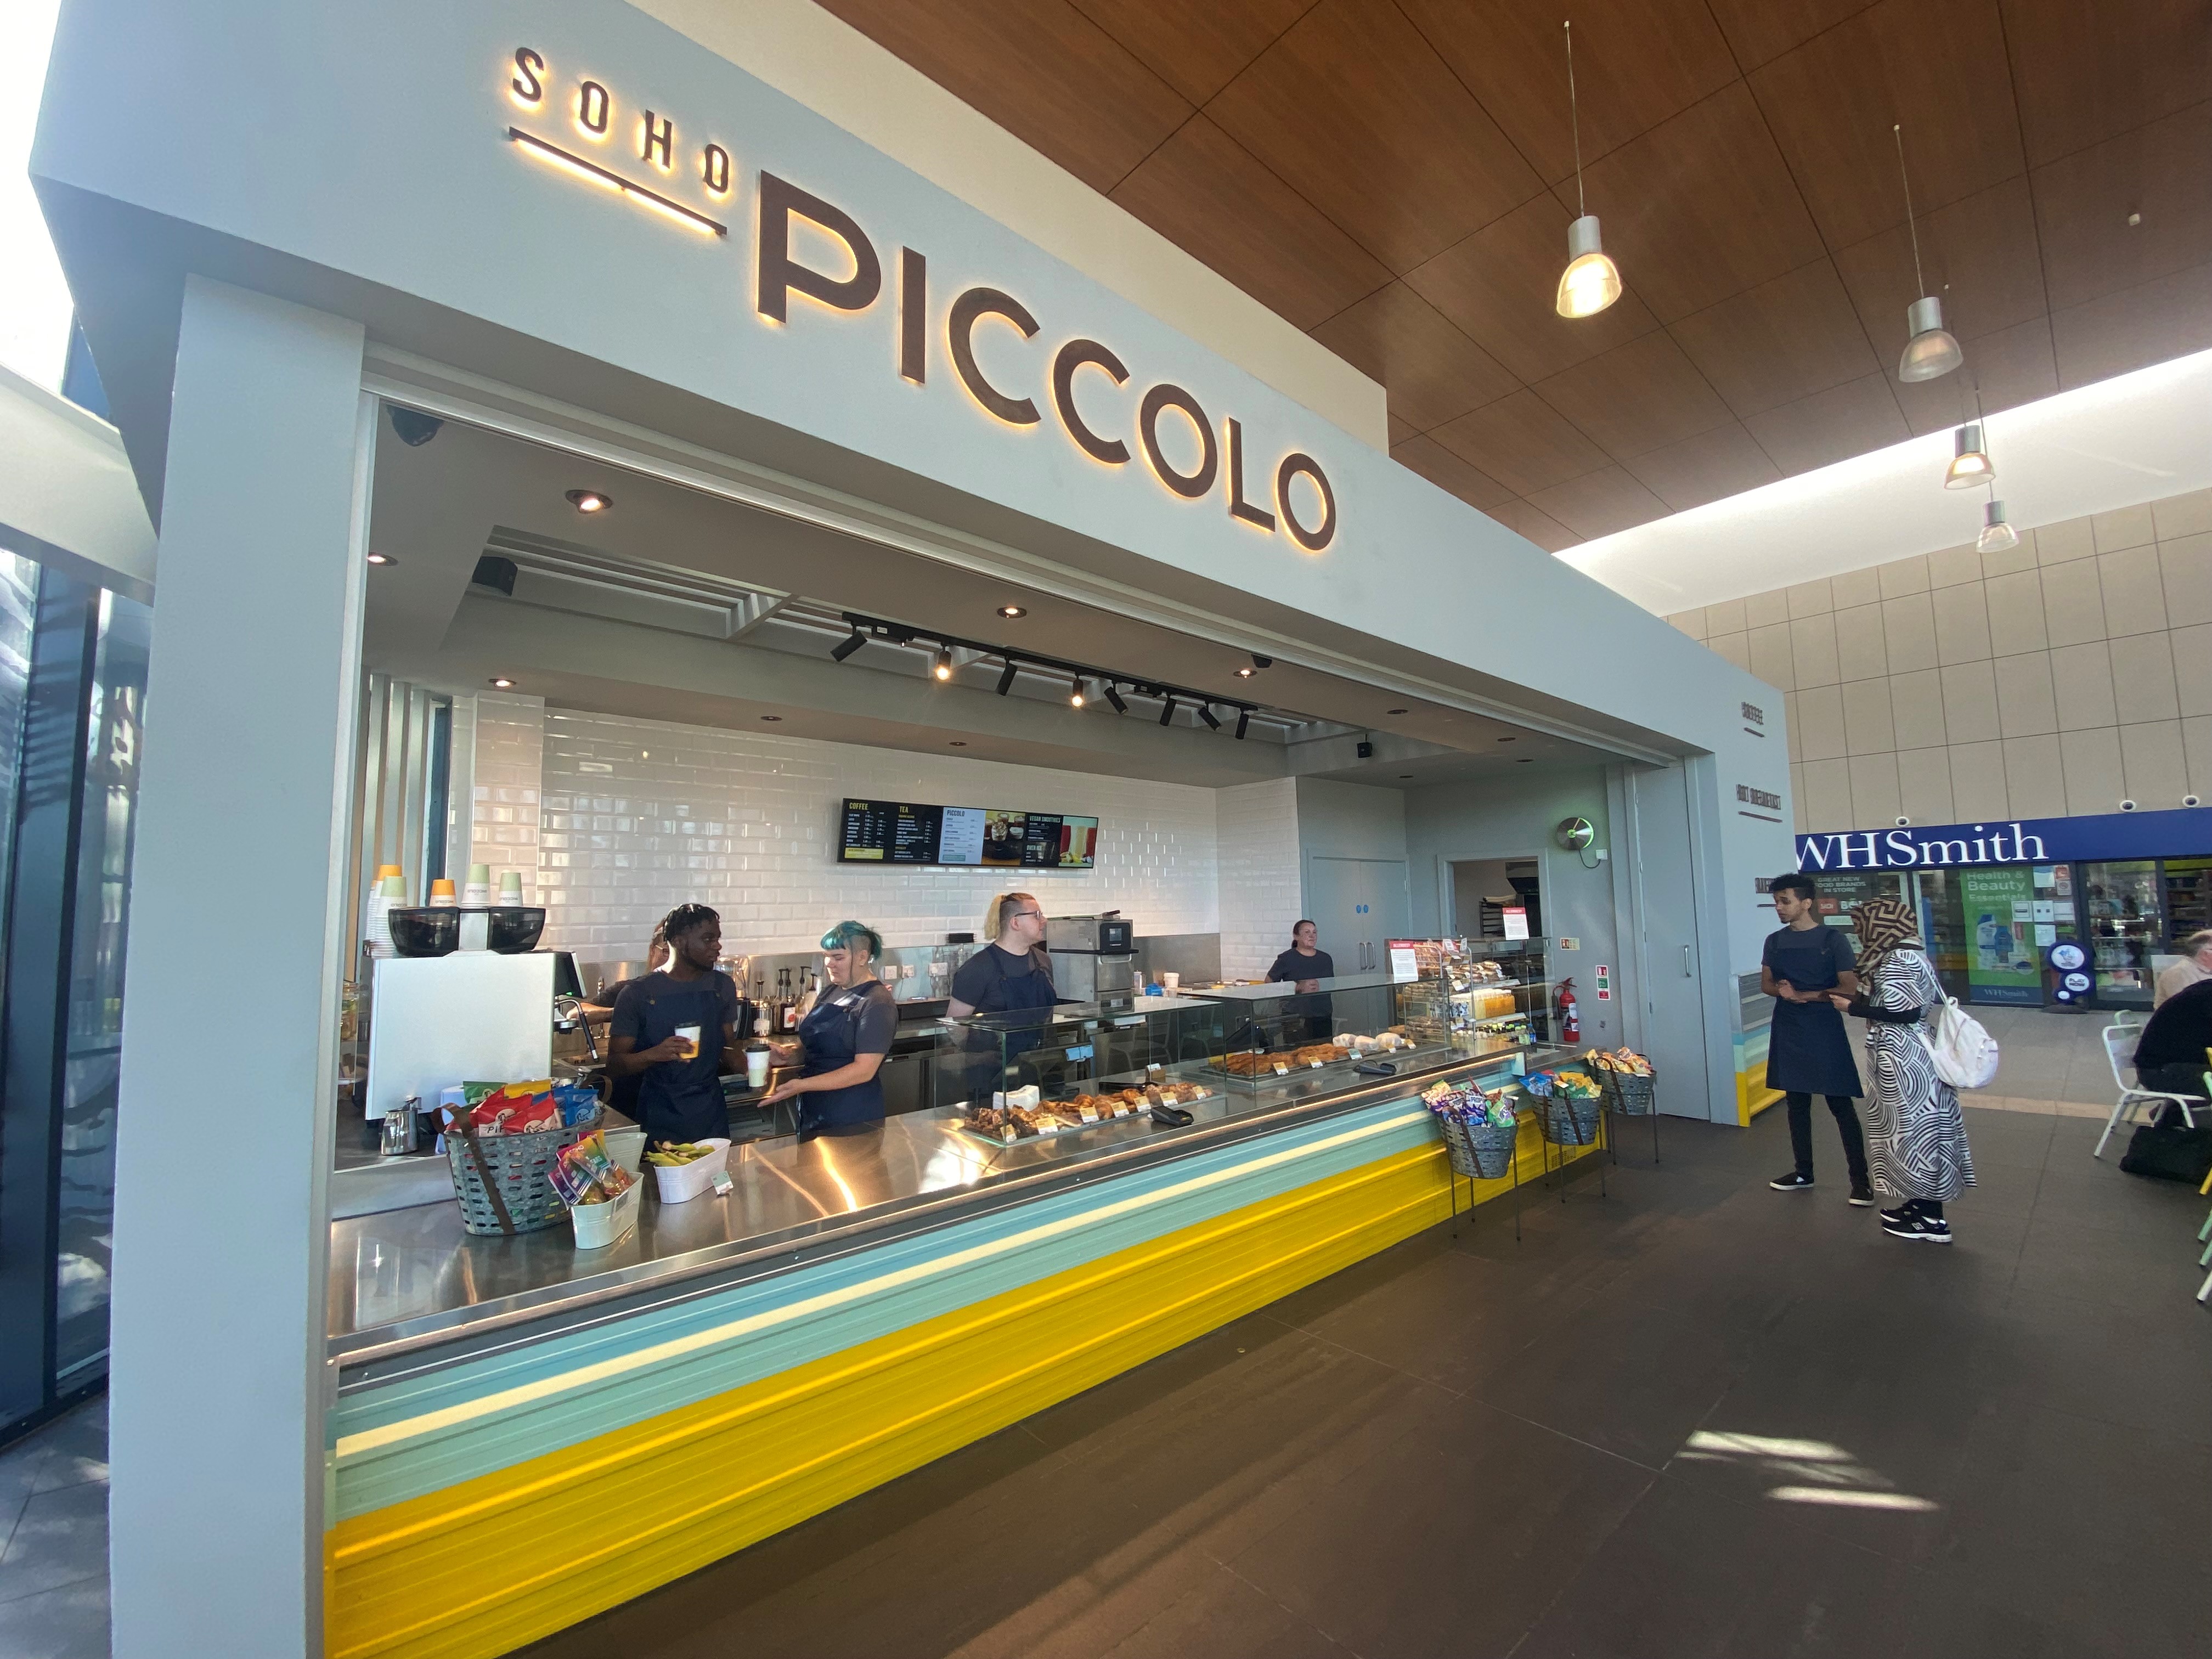 SOHO Piccolo - Coffee & Food on the go at Northampton Train Station SOHO Piccolo Northampton 01604 806904